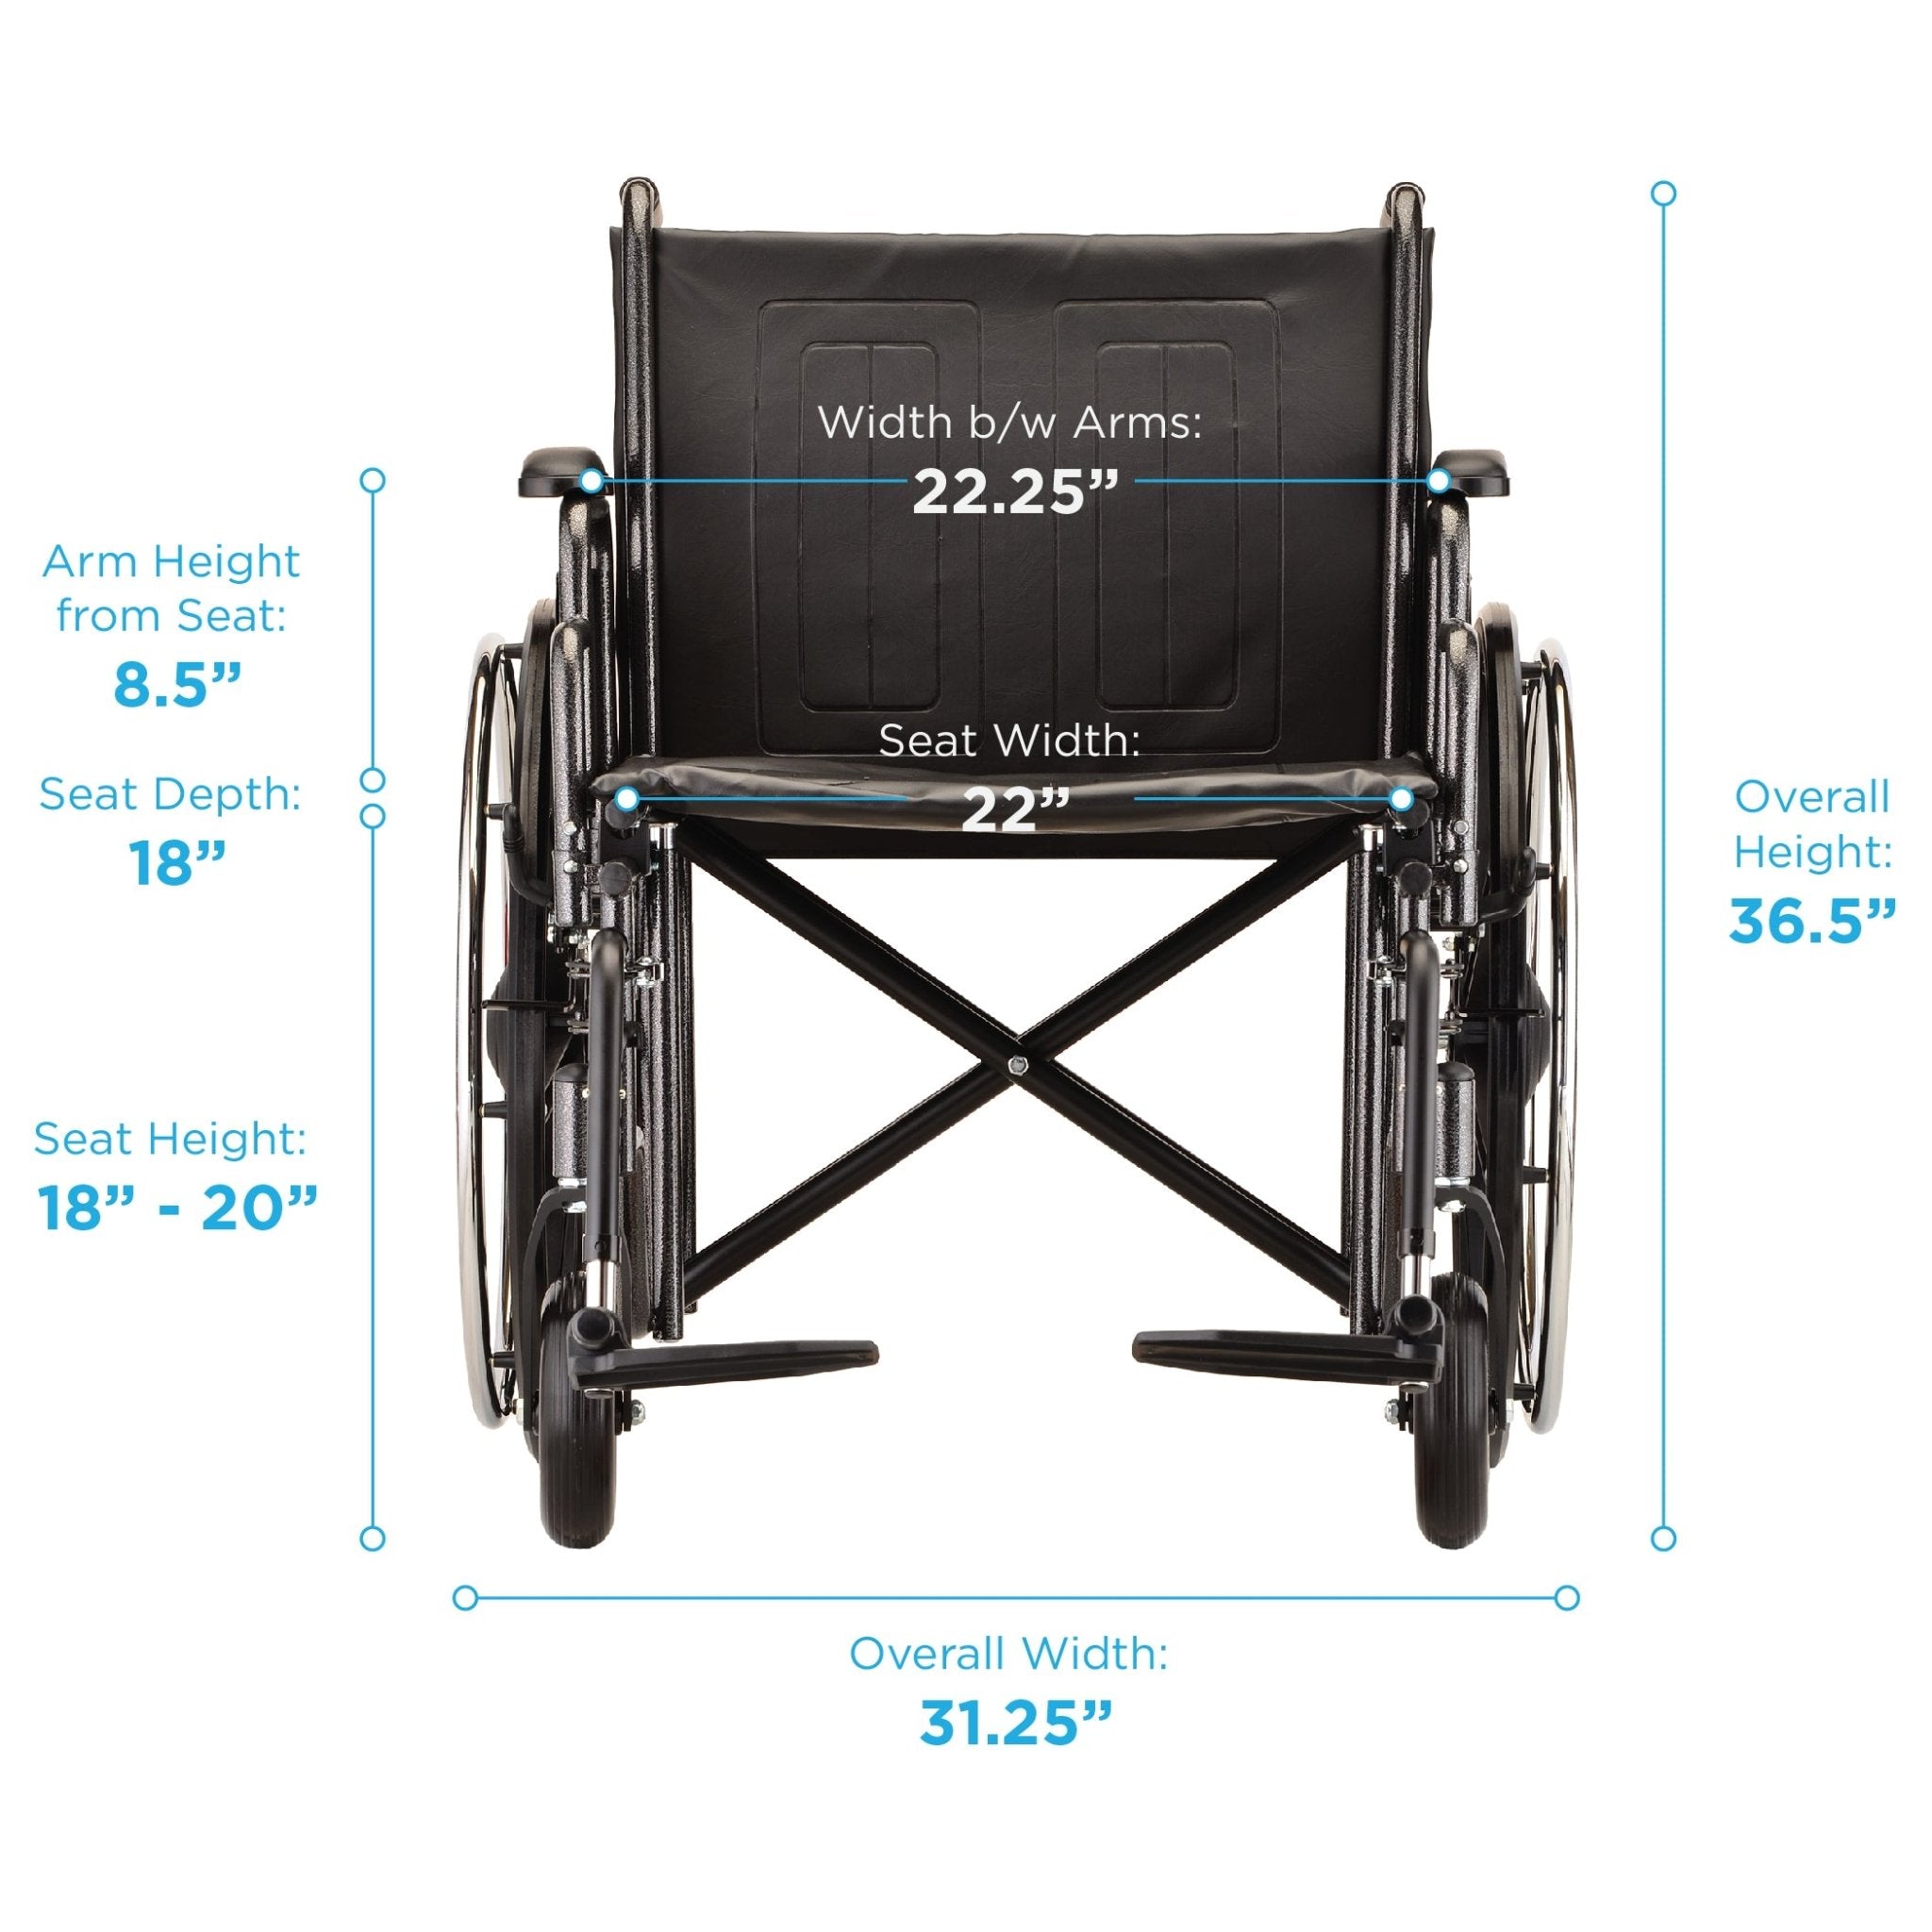 Nova 22" HD Steel Wheelchair with Desk Arms and Footrests- 5220S - Midwest DME Supply